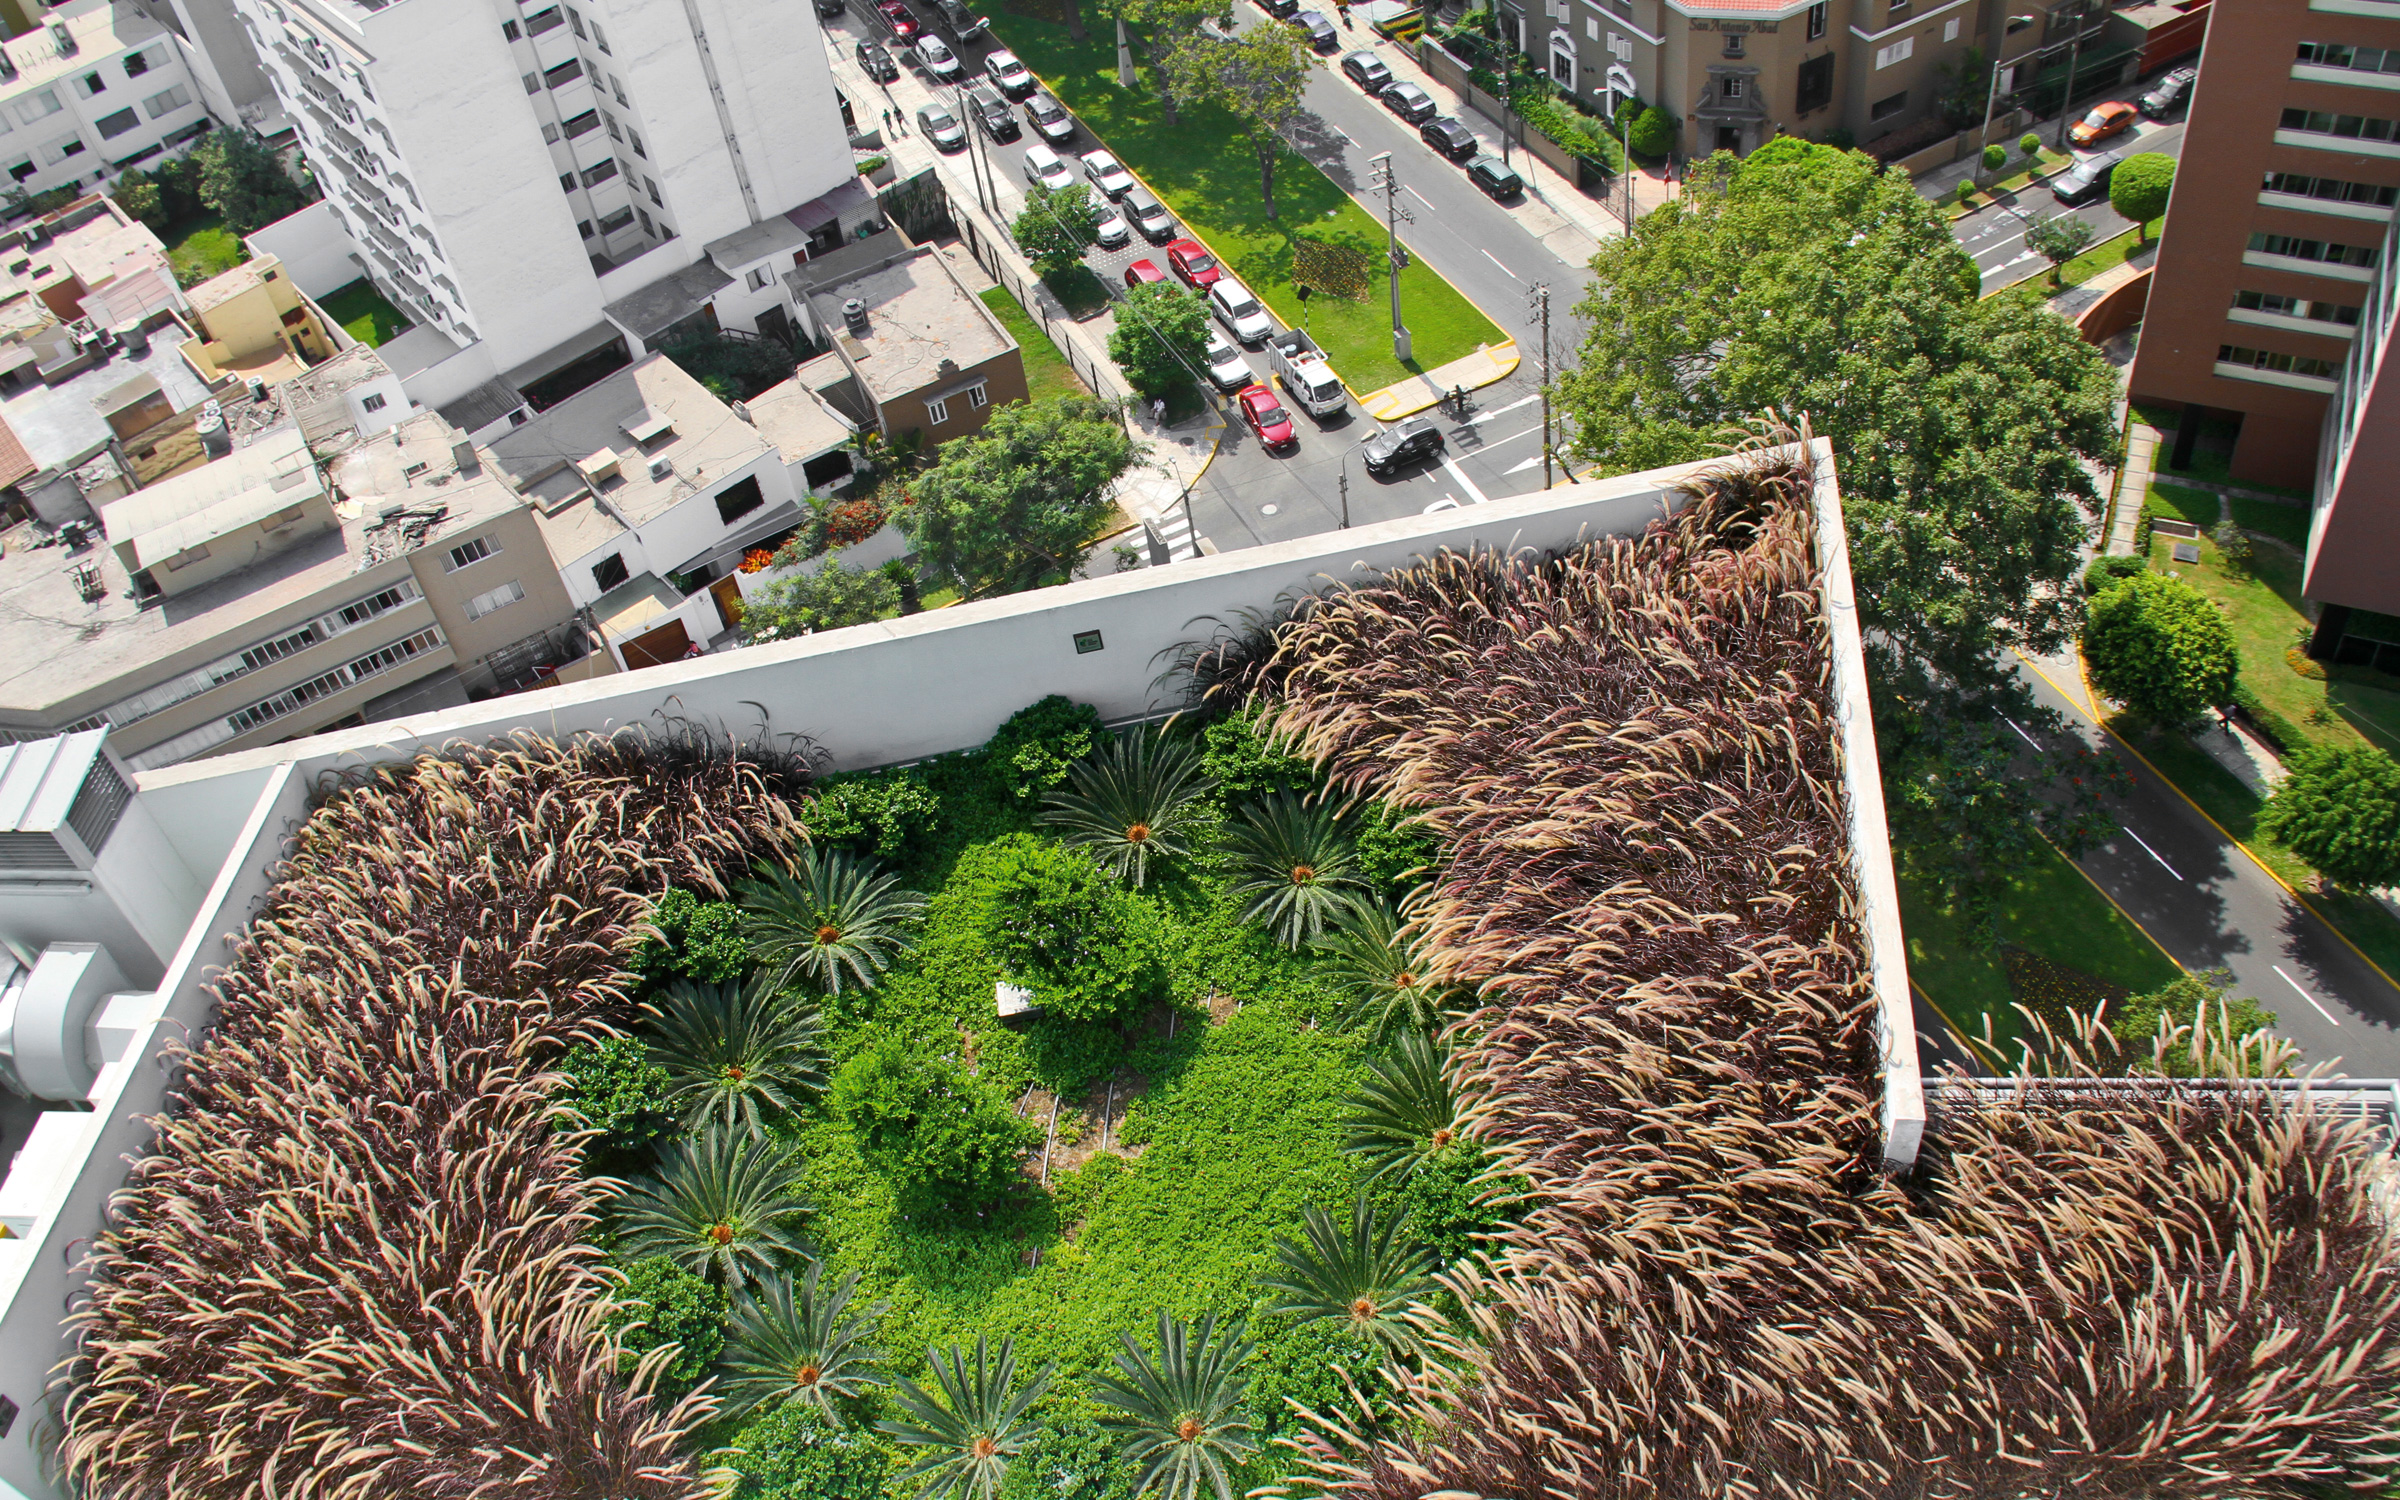 Bird's eye view of a roof garden with ornamental grasses and small palm trees